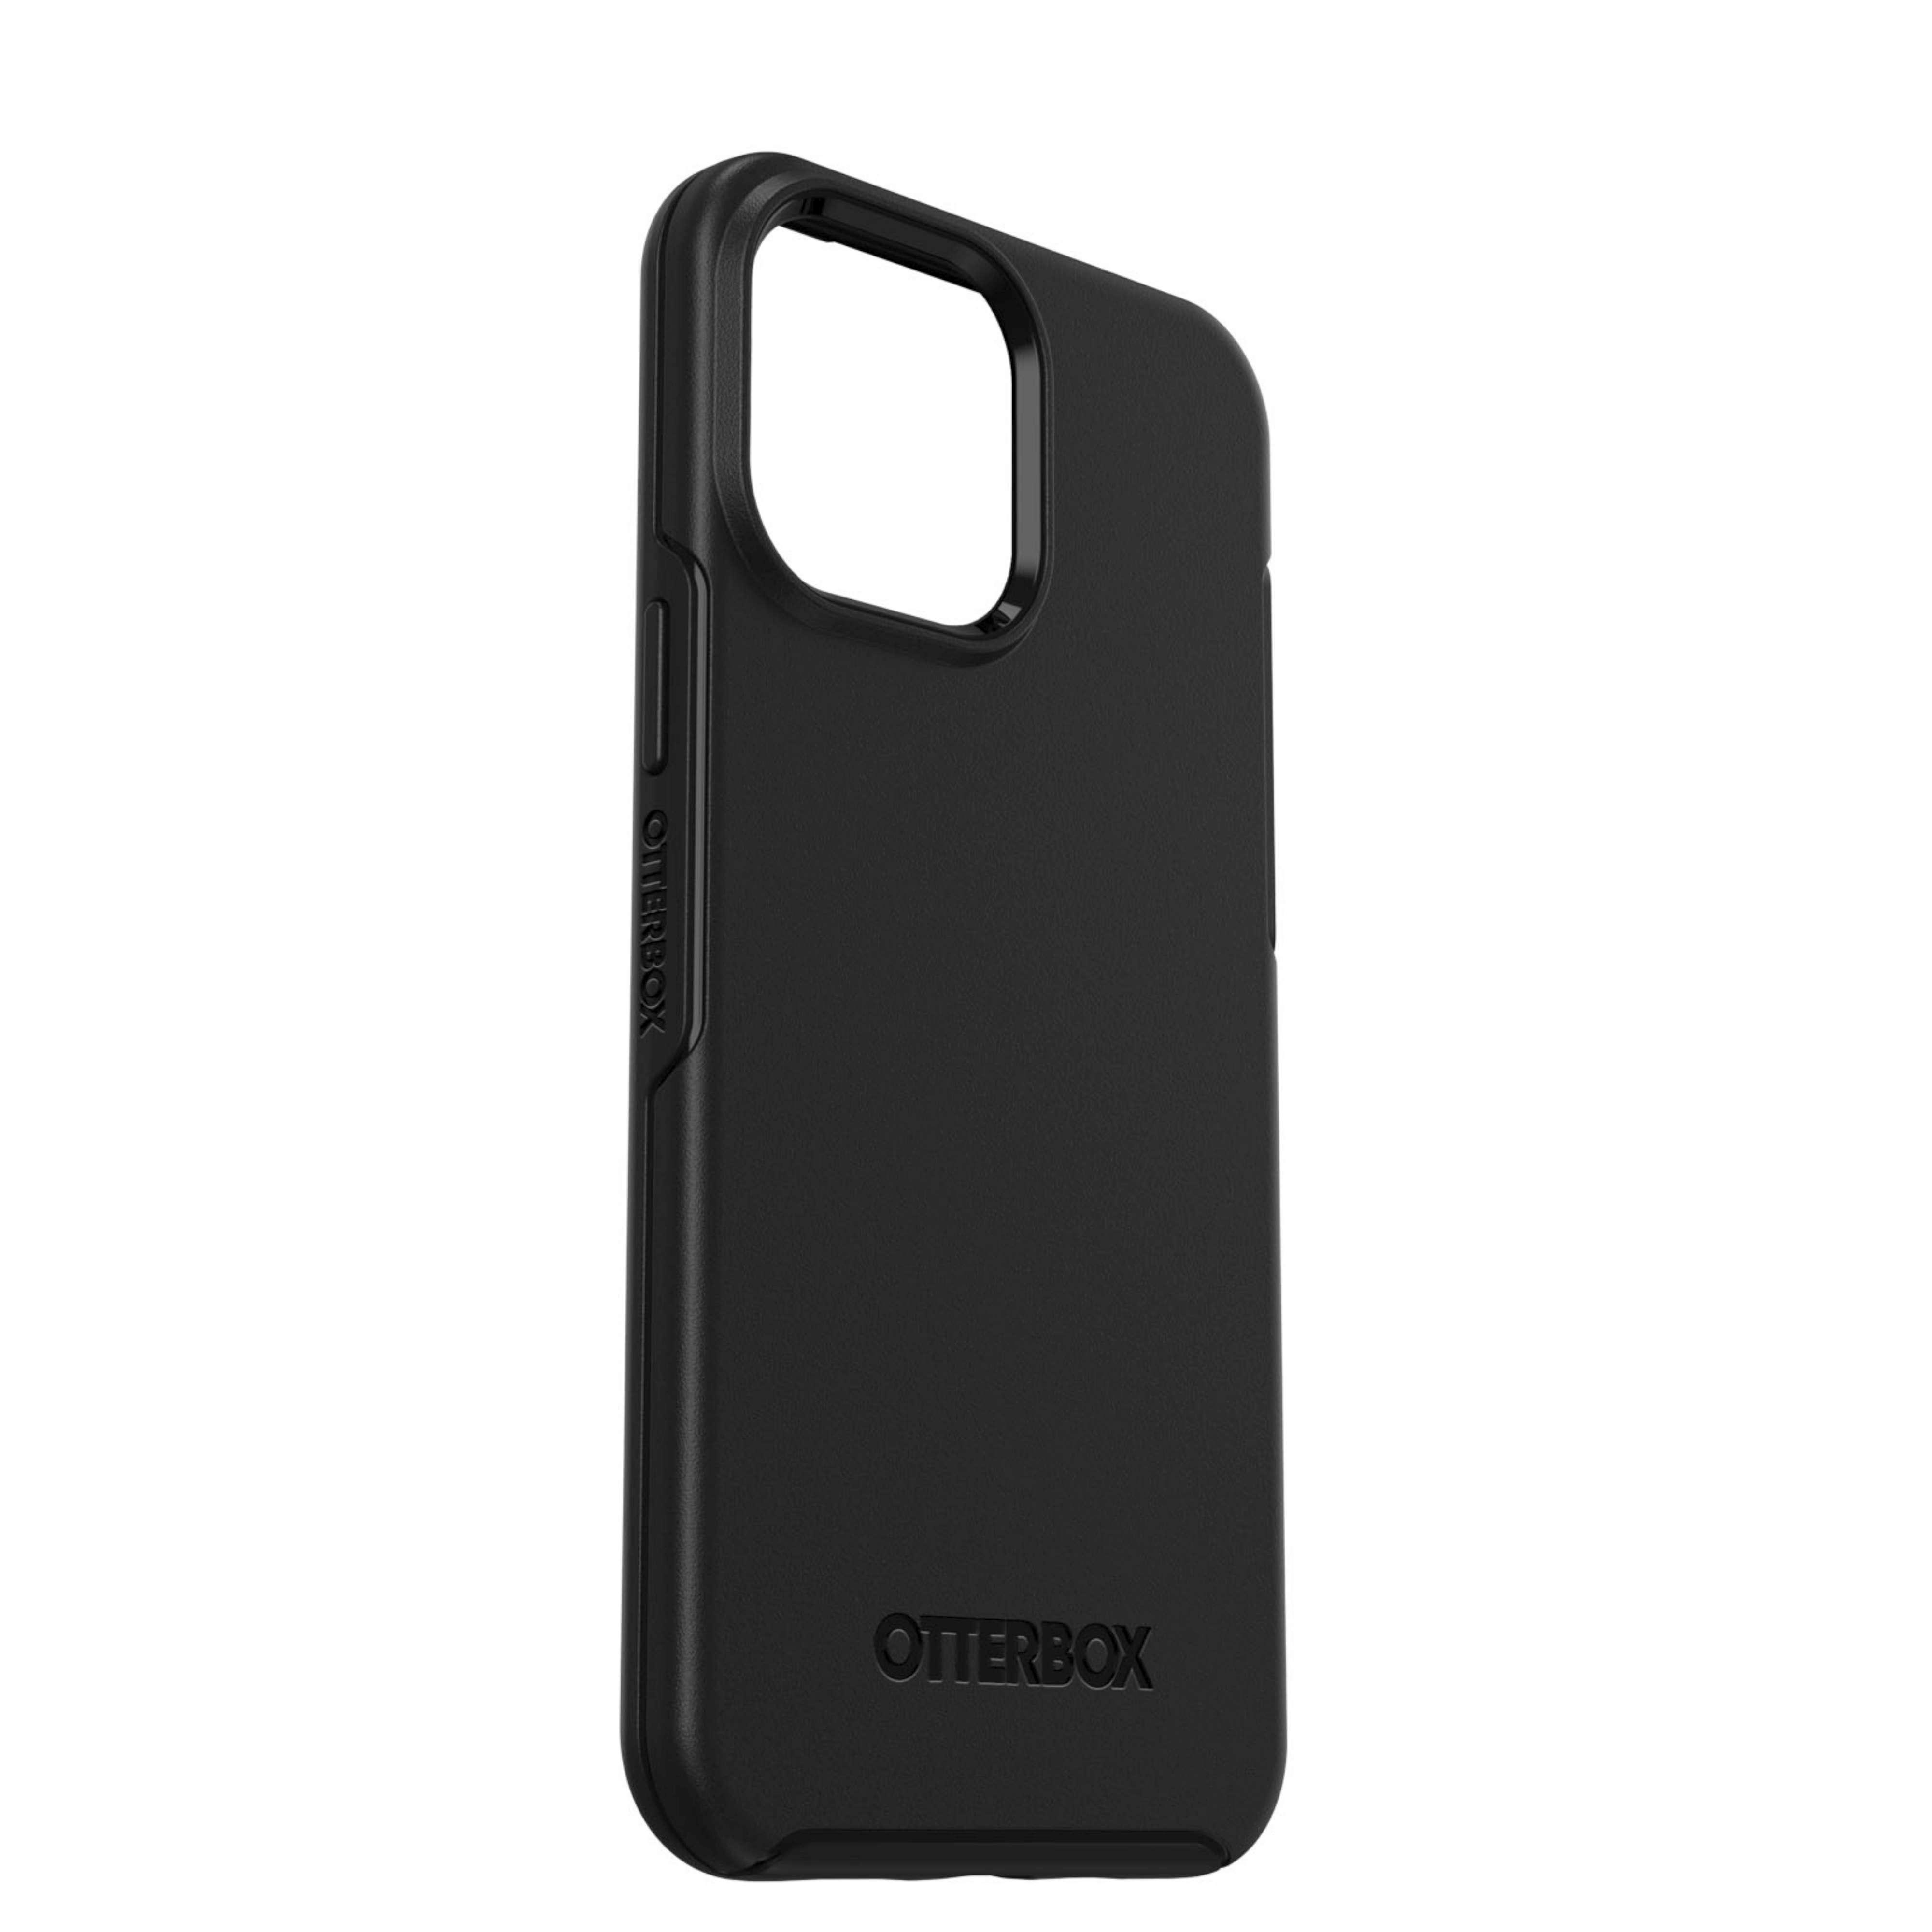 Symmetry, Apple, iPhone Schwarz 13 OTTERBOX Backcover, Max, Pro